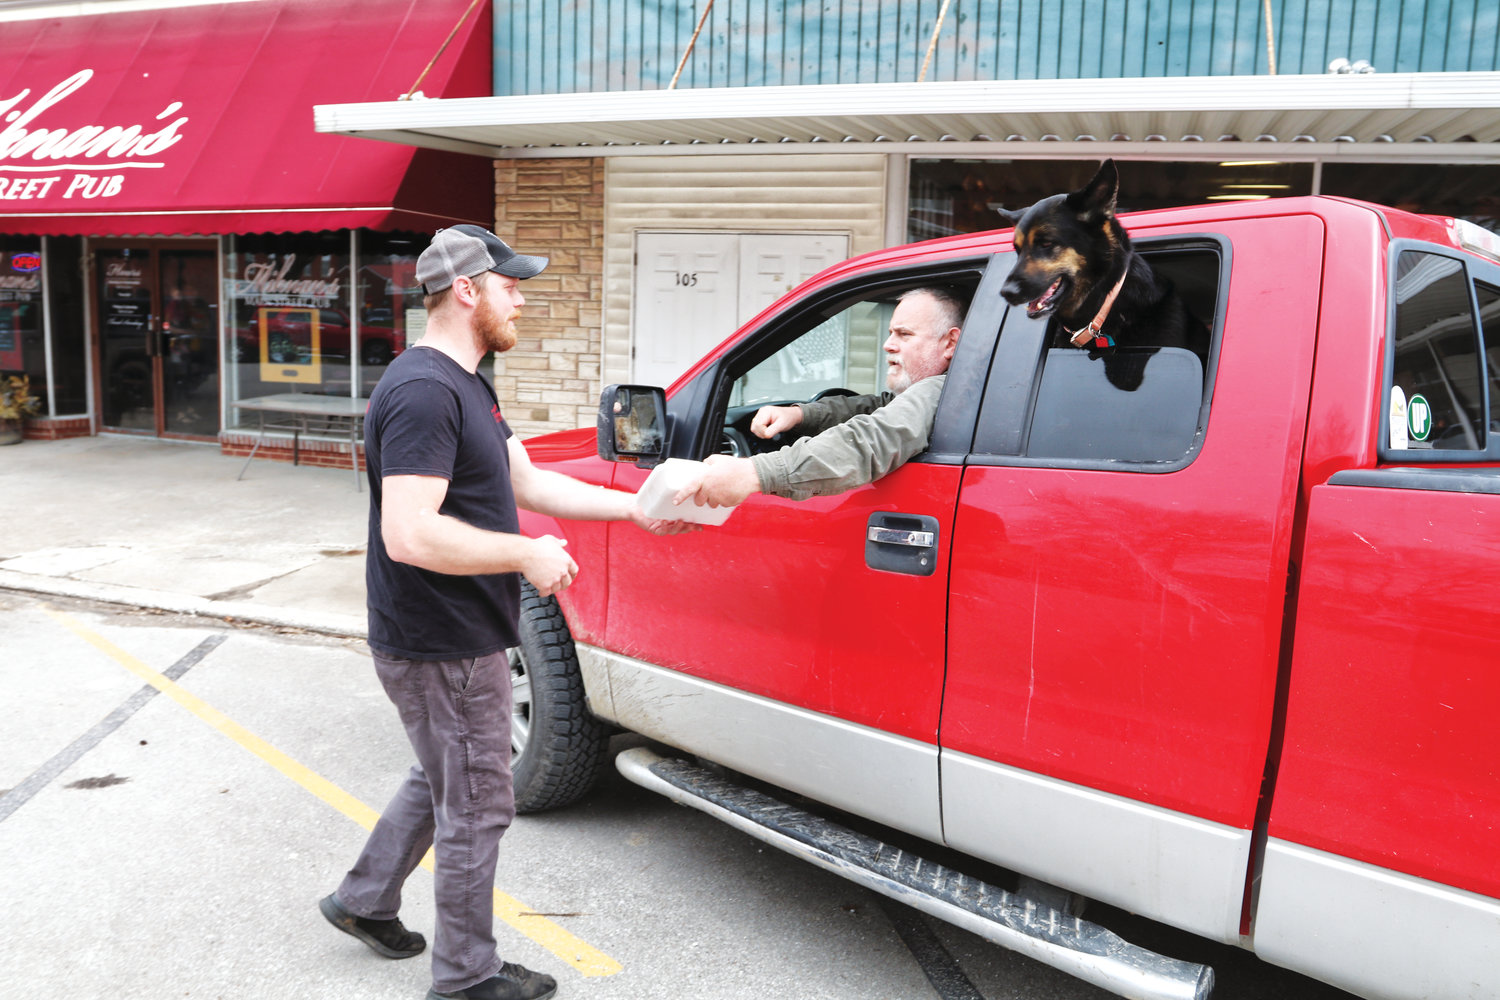 Brett Myers and his dog, Max Baer (named after the 1930s heavyweight boxing champion), enjoy curb-side delivery from Miknan’s Main Street Pub owner Leremie Shafer.